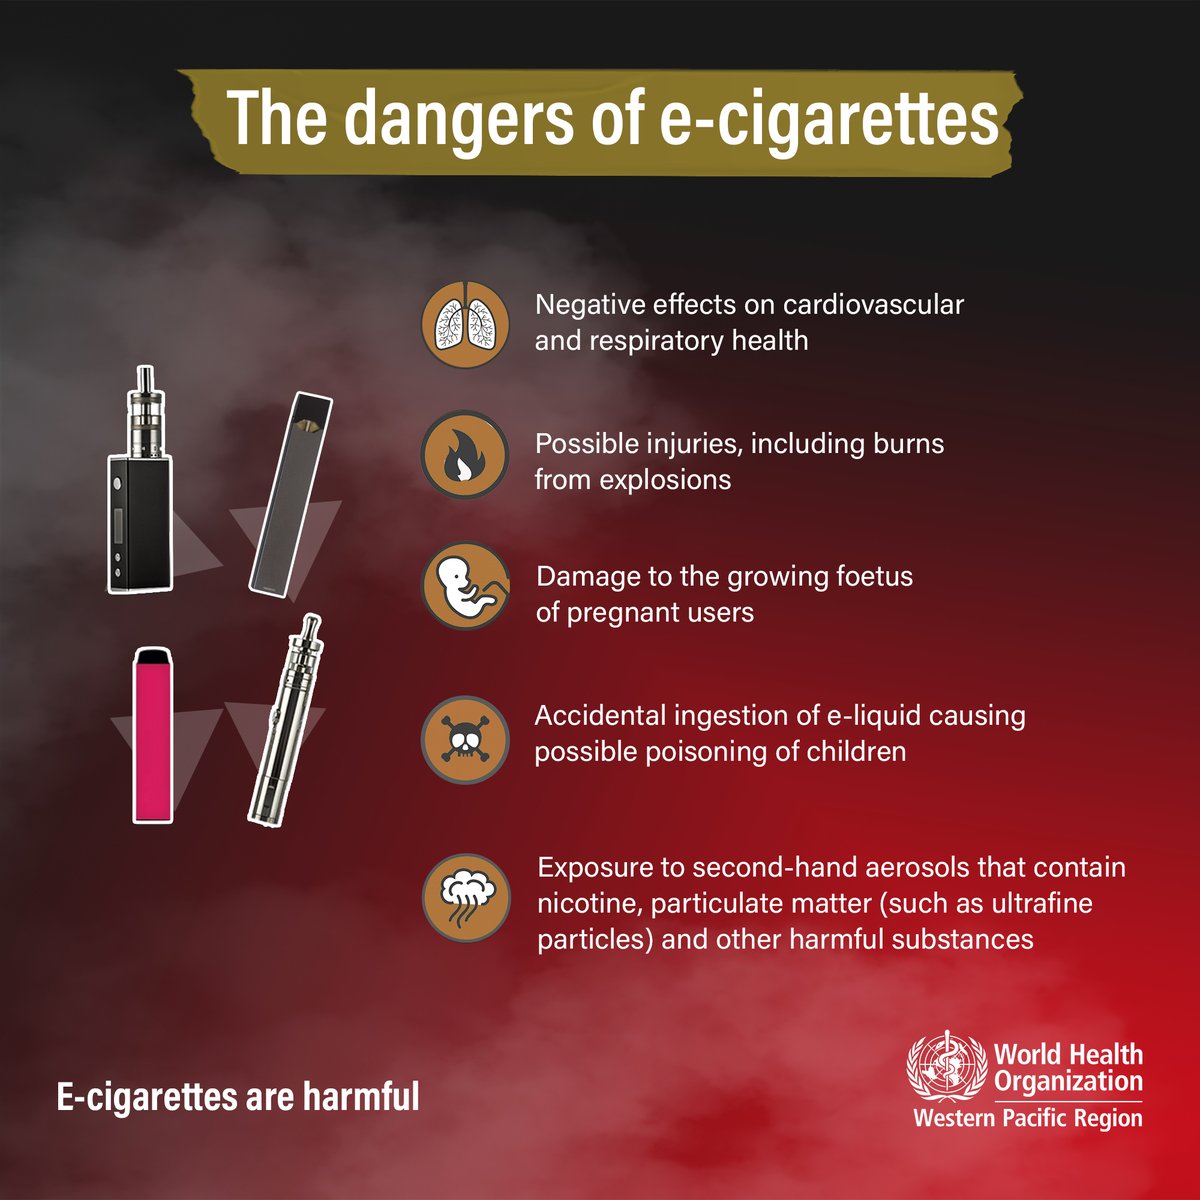 ❗E-cigarettes have negative health effects.

#CommitToQuit all forms of tobacco and cigarette use.